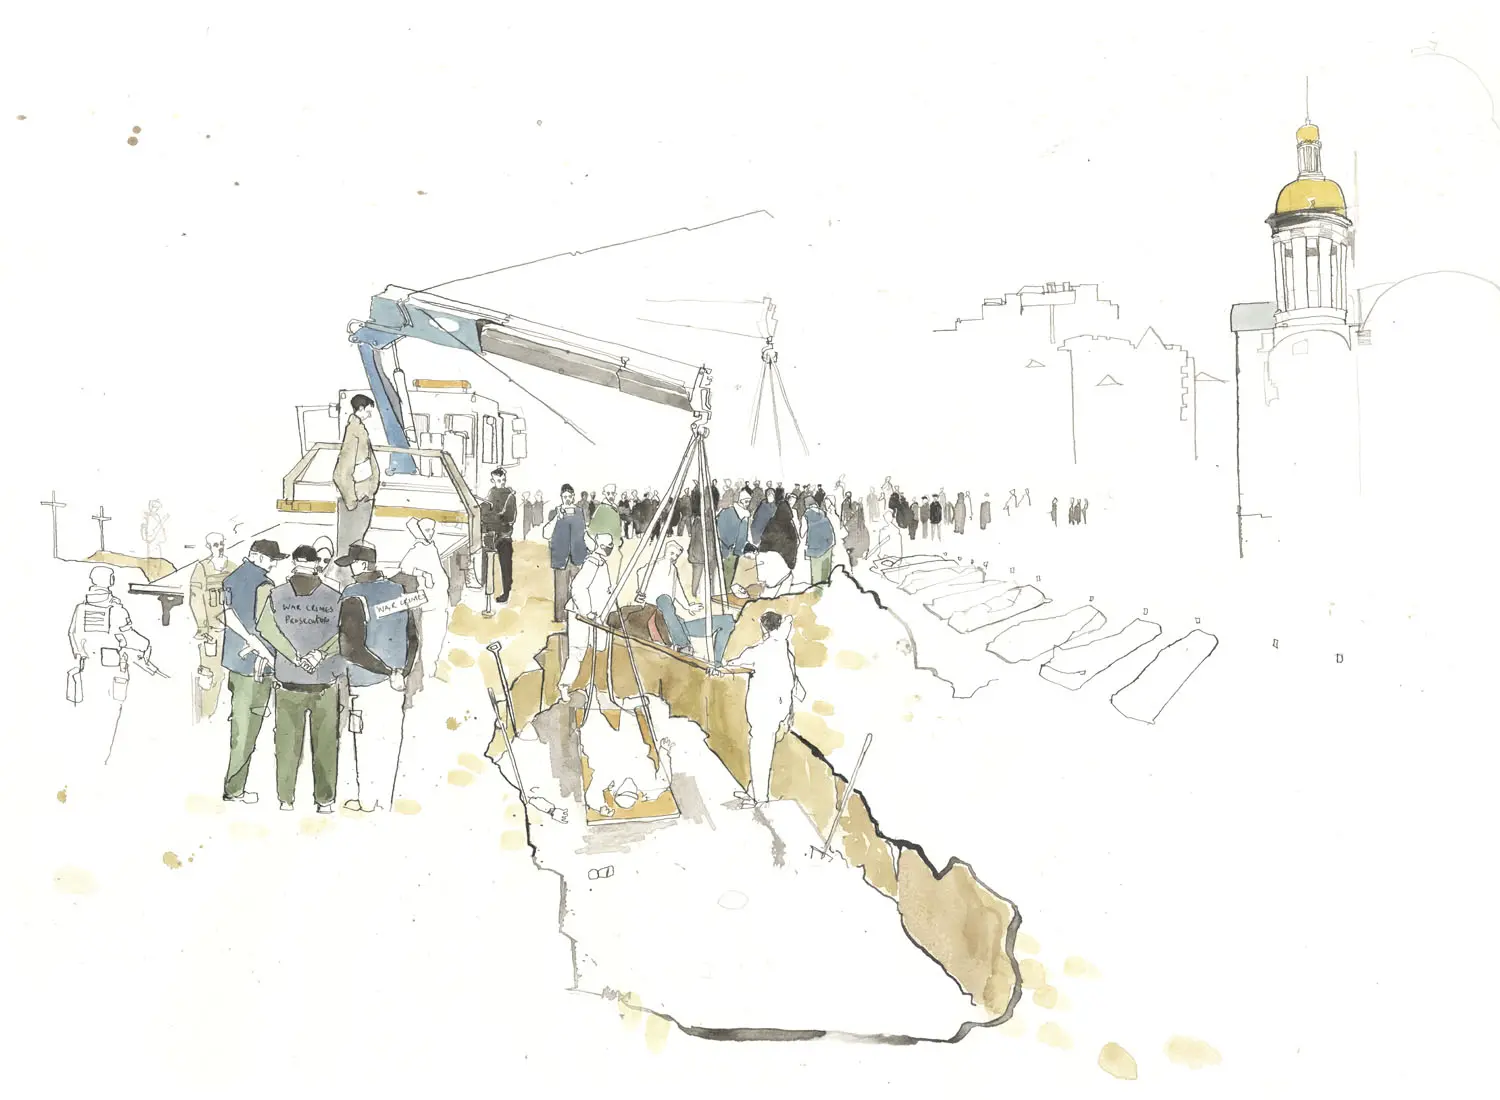 Illustration of a crane on the back of a truck lifting bodies out of a large hole. There are body bags lined up along the exhumation, many people and soldiers standing around. There is a golden dome indicating the grave is next to a church. 